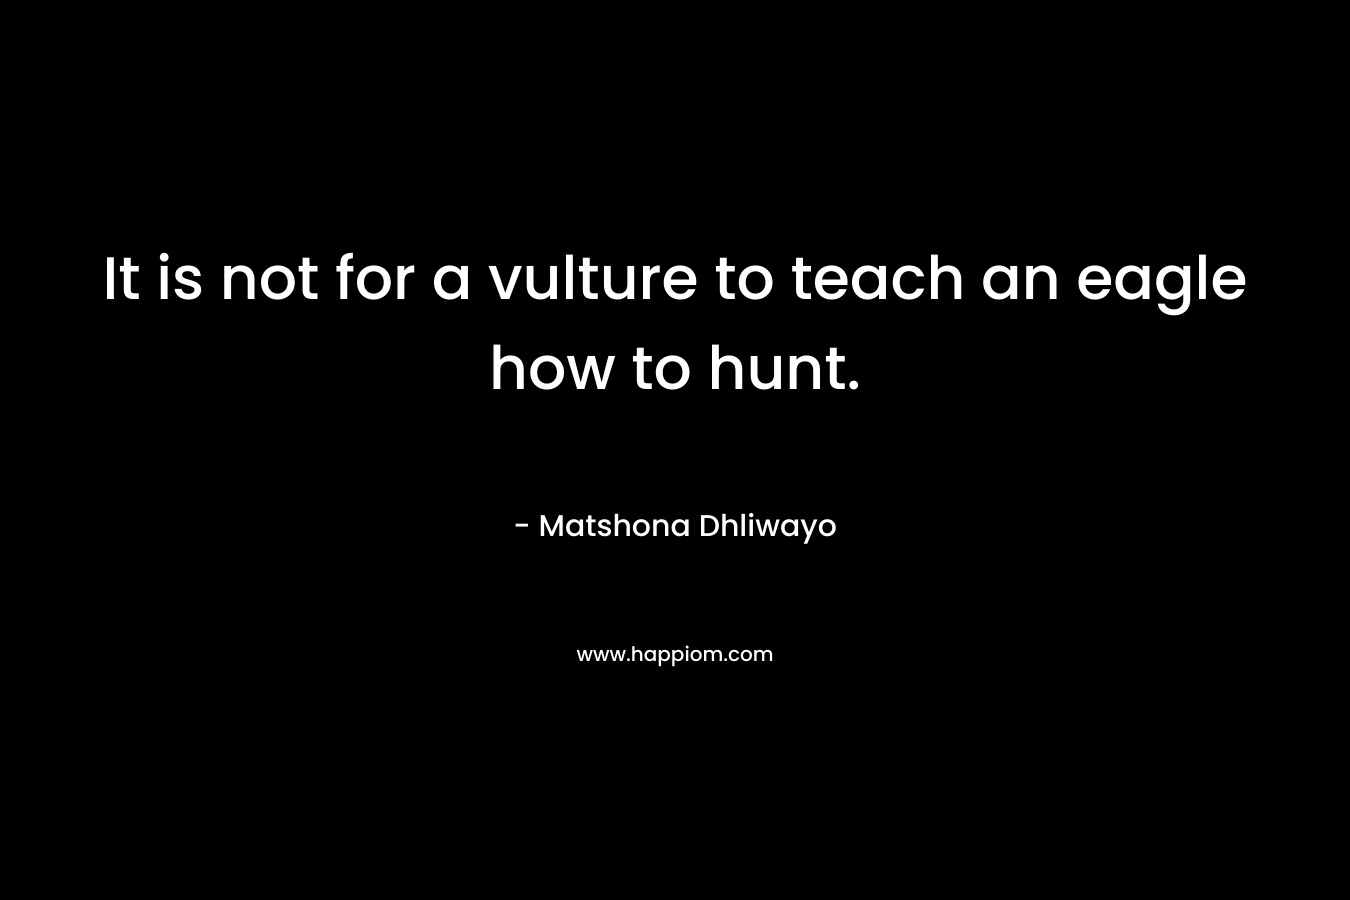 It is not for a vulture to teach an eagle how to hunt.